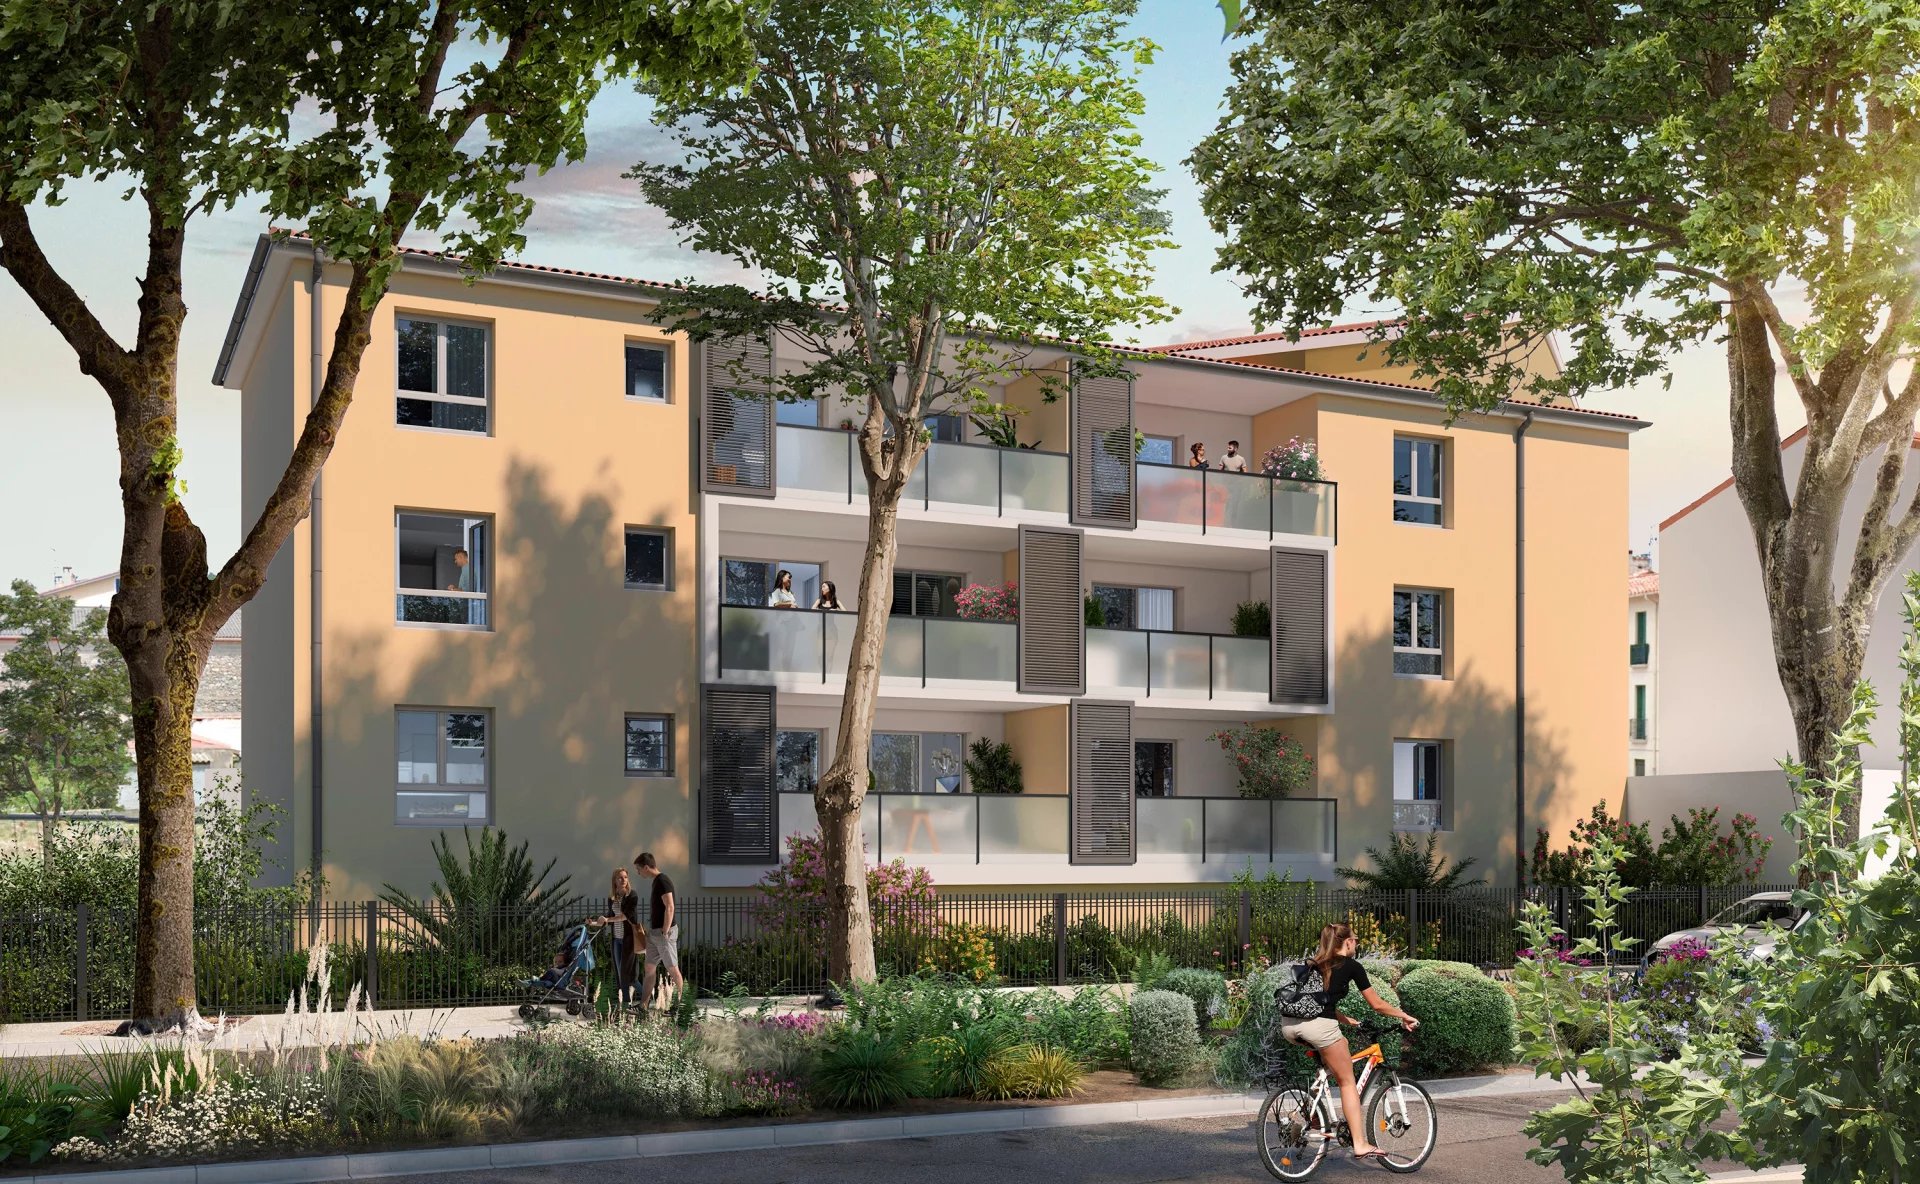 OFF-PLAN 1-BED APPARTMENT (LOT 201), RESIDENCE L'ANGLE DES ARTS, CERET